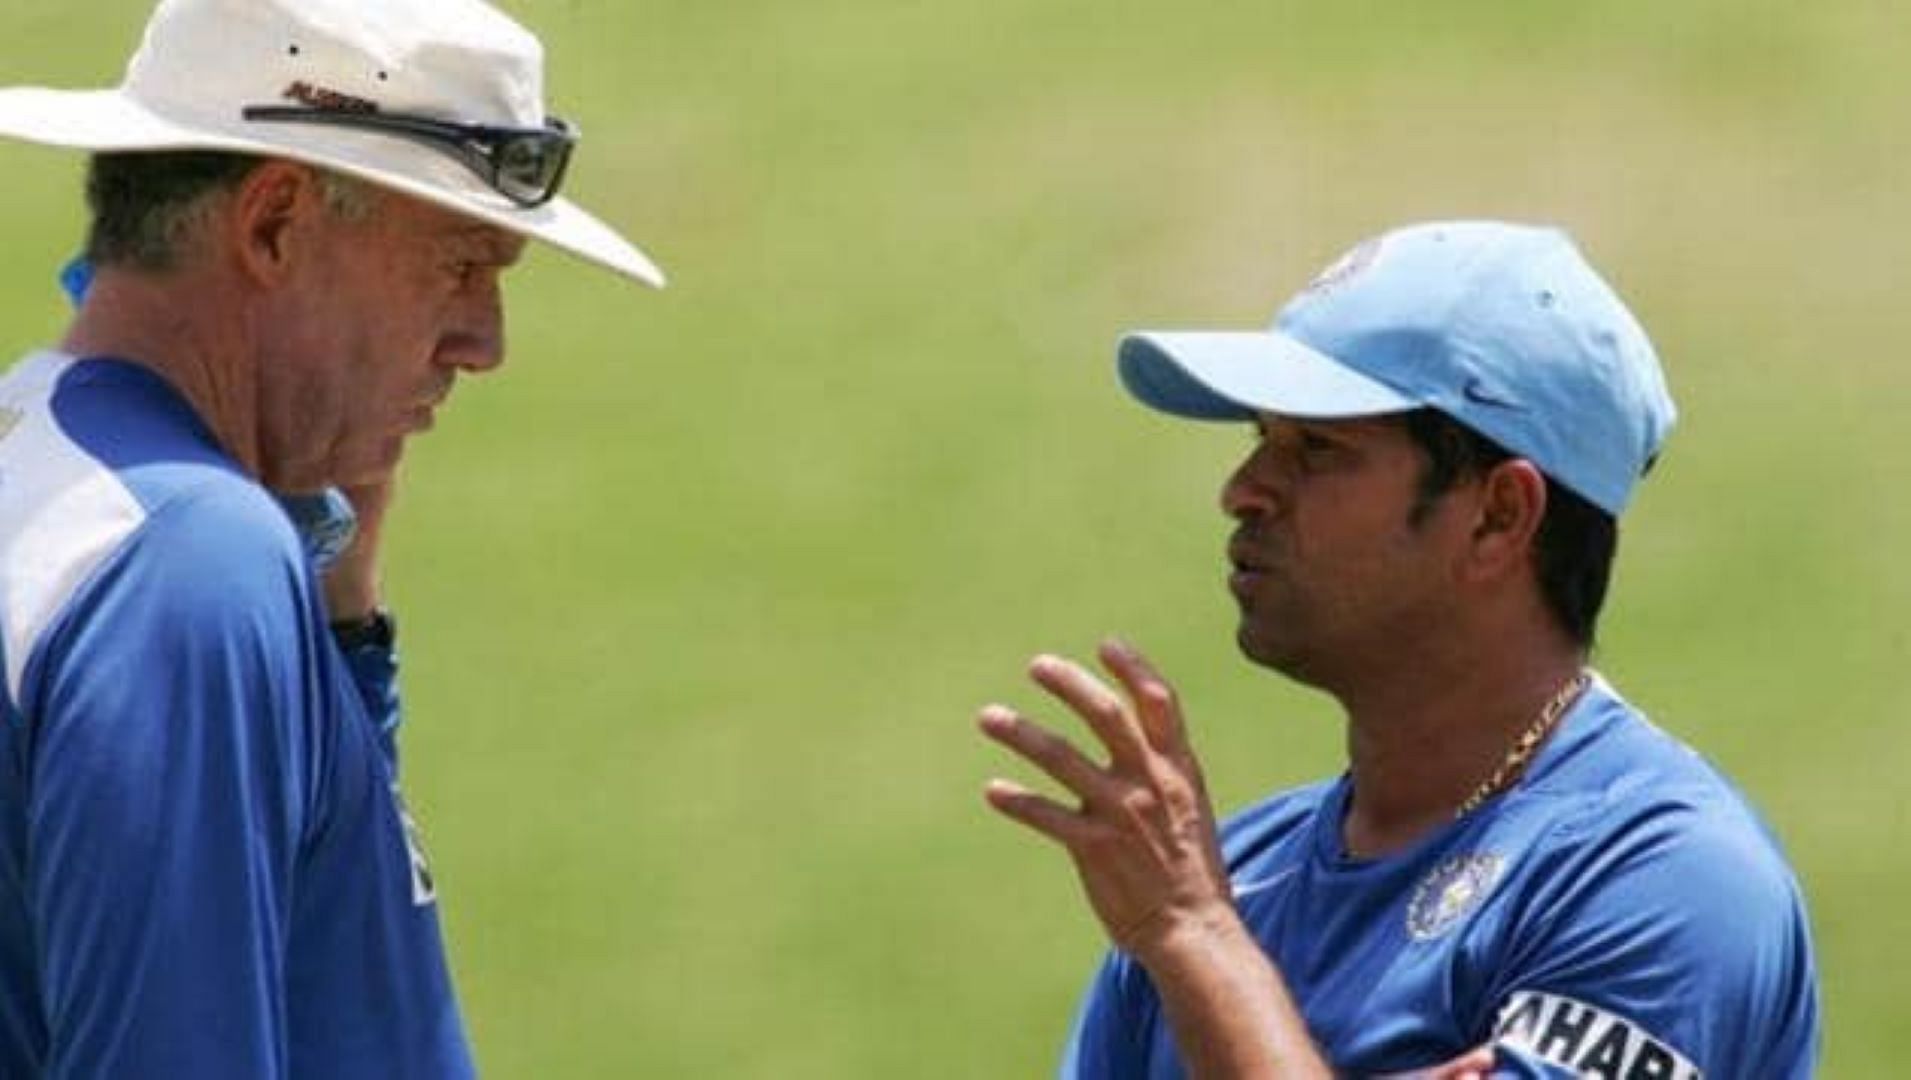 Sachin Tendulkar made some stunning allegations about Greg Chappell in his autobiography.